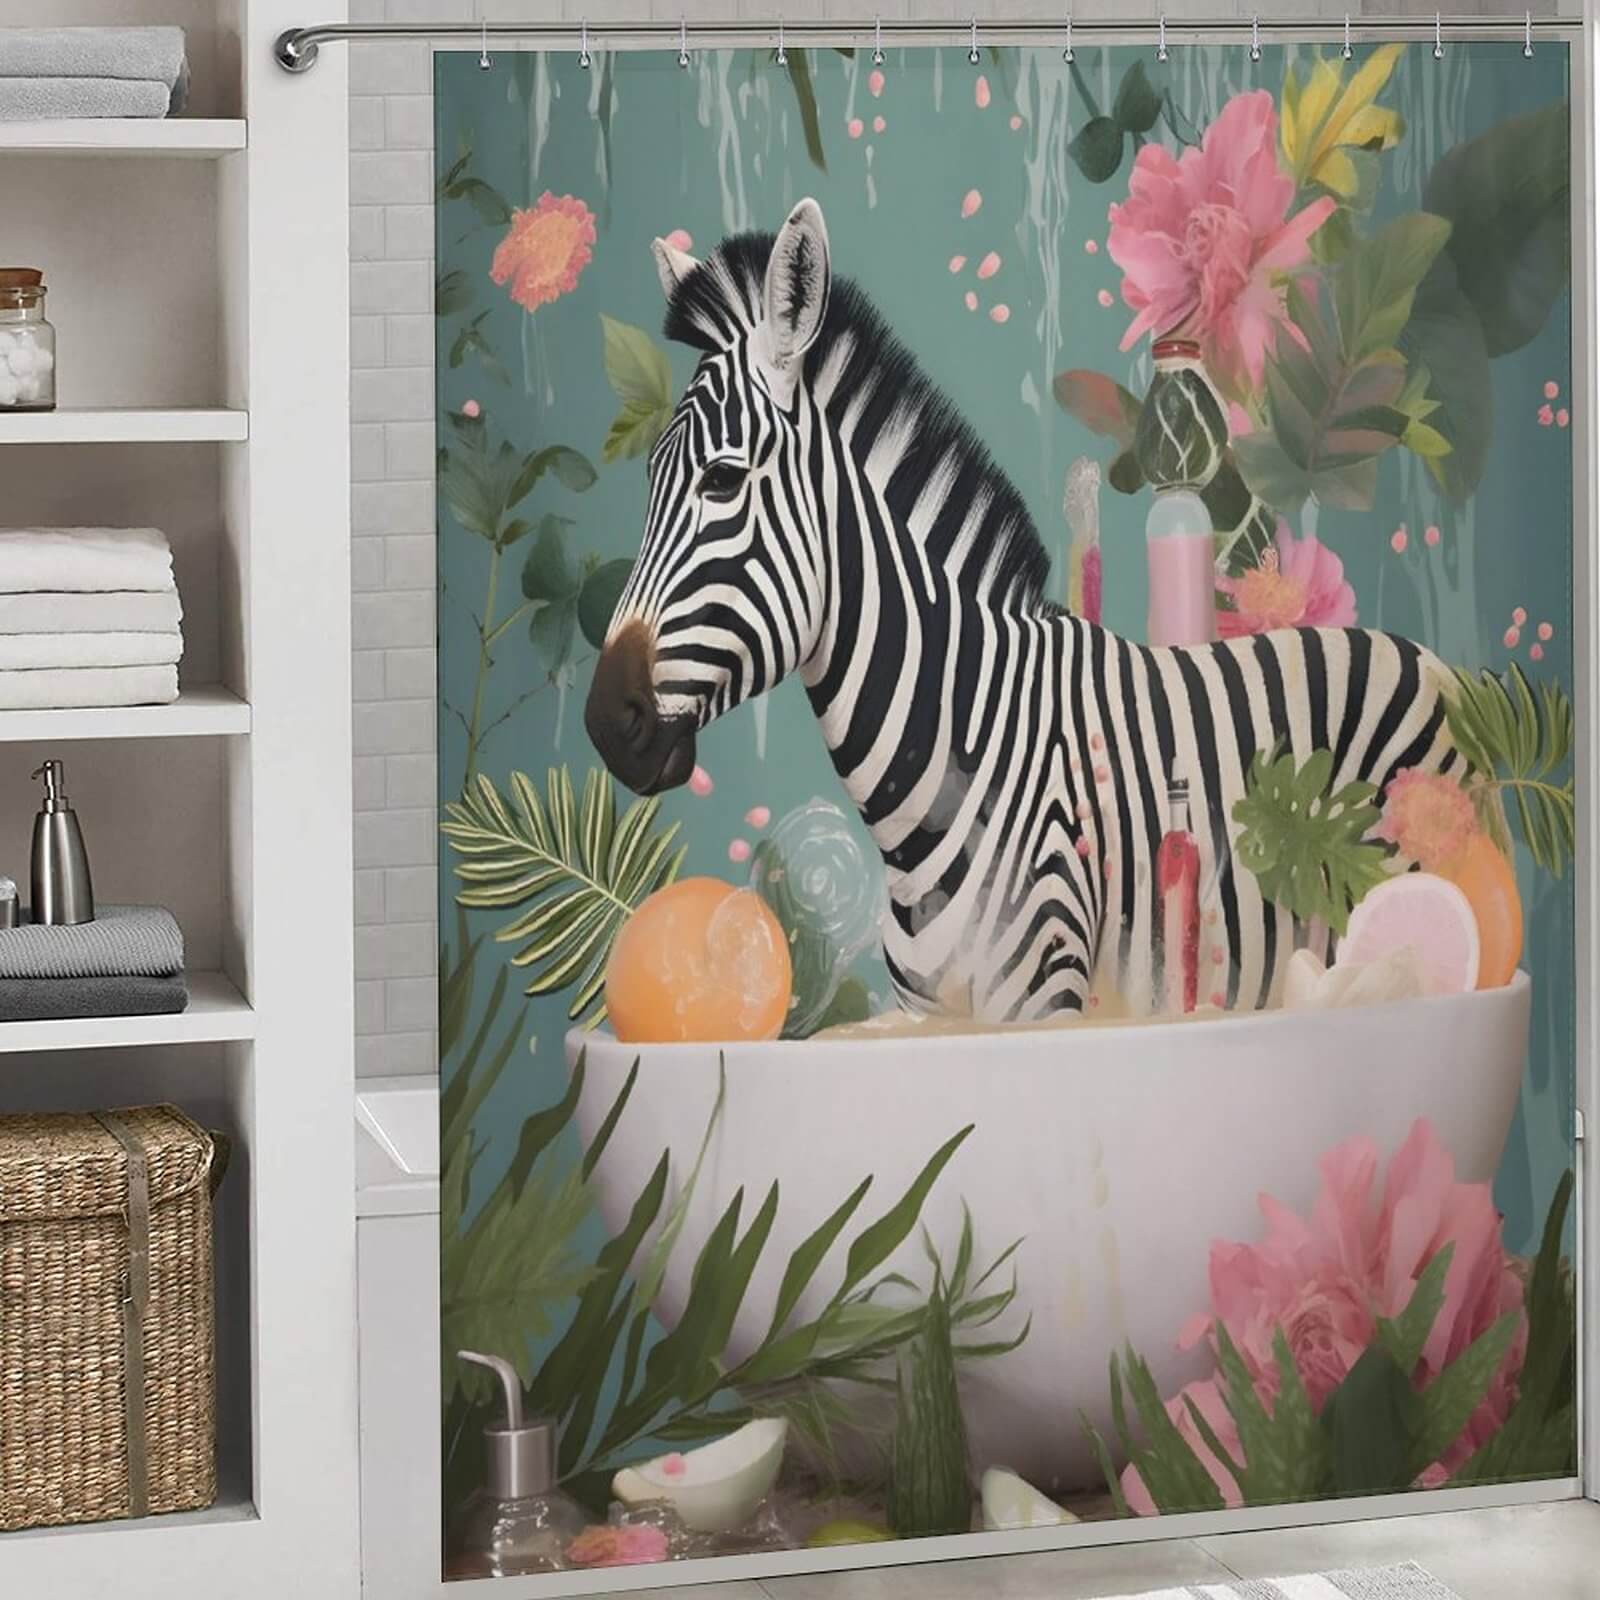 This waterproof Zebra In Bathtub Shower Curtain from Cotton Cat brings a touch of the safari to your bathroom, featuring a playful zebra relaxing in a bath tub.